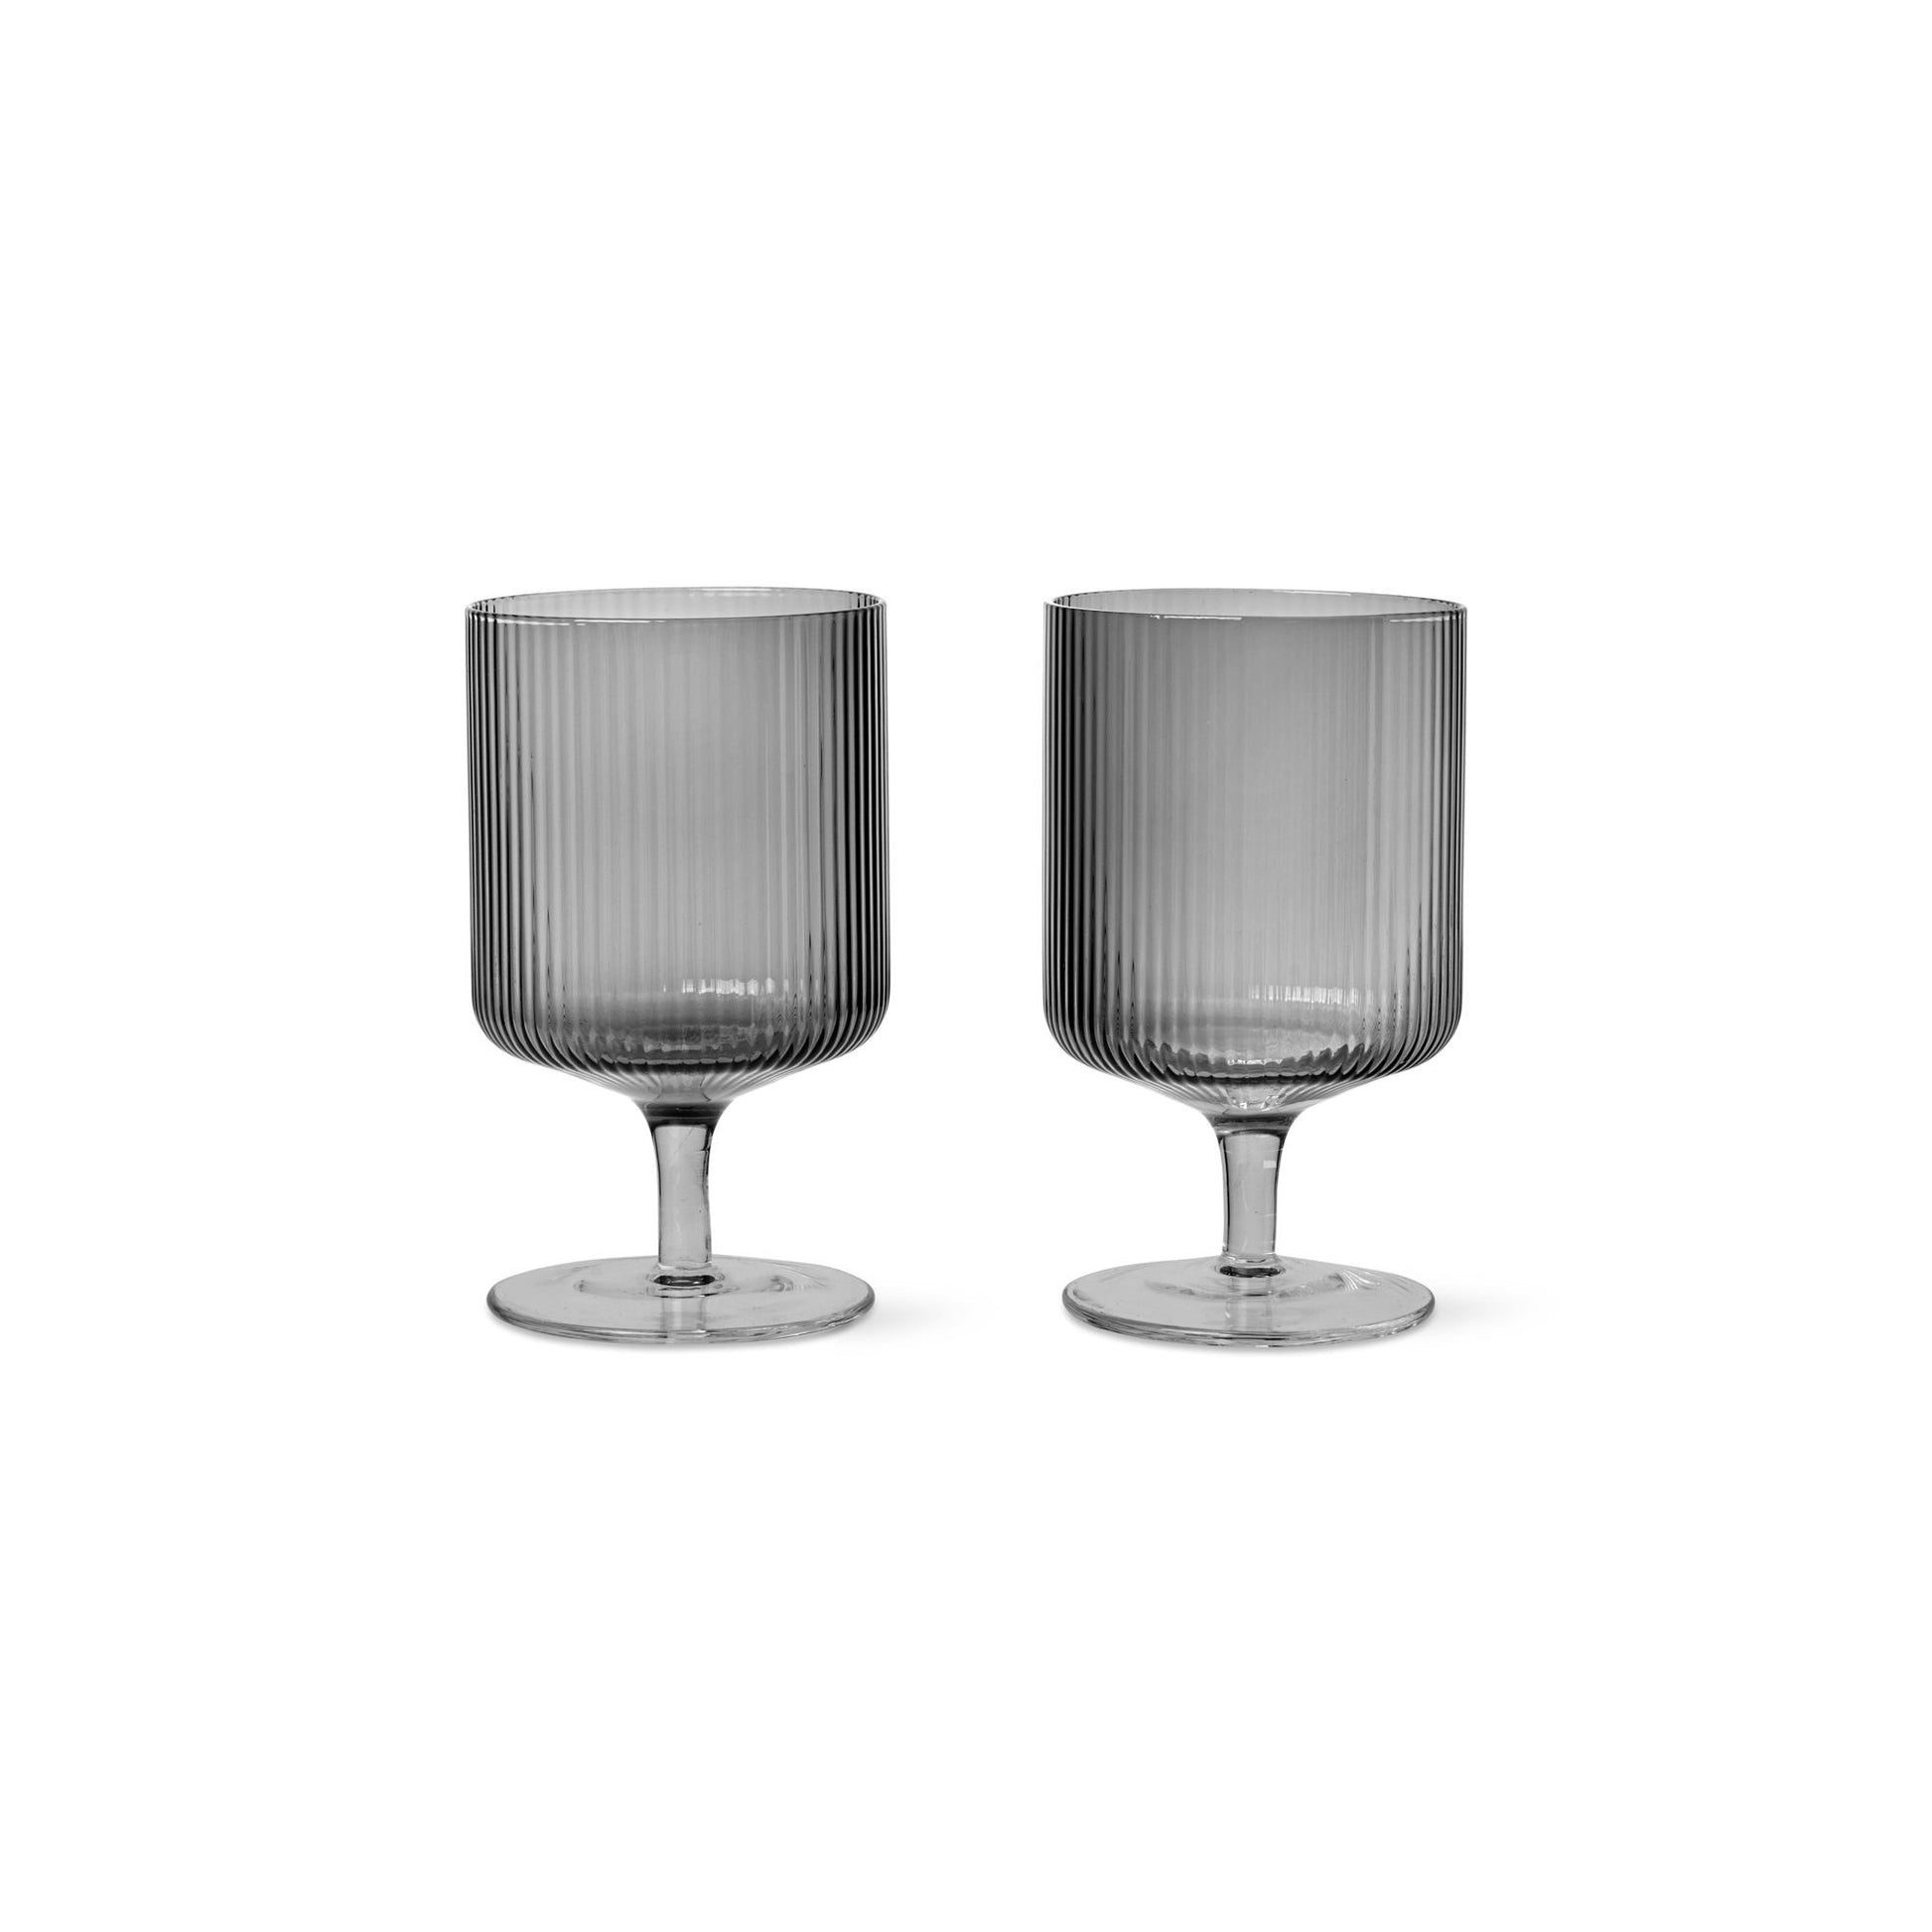 Ripple Wine Glass Set of 2 by Ferm Living #Smoked